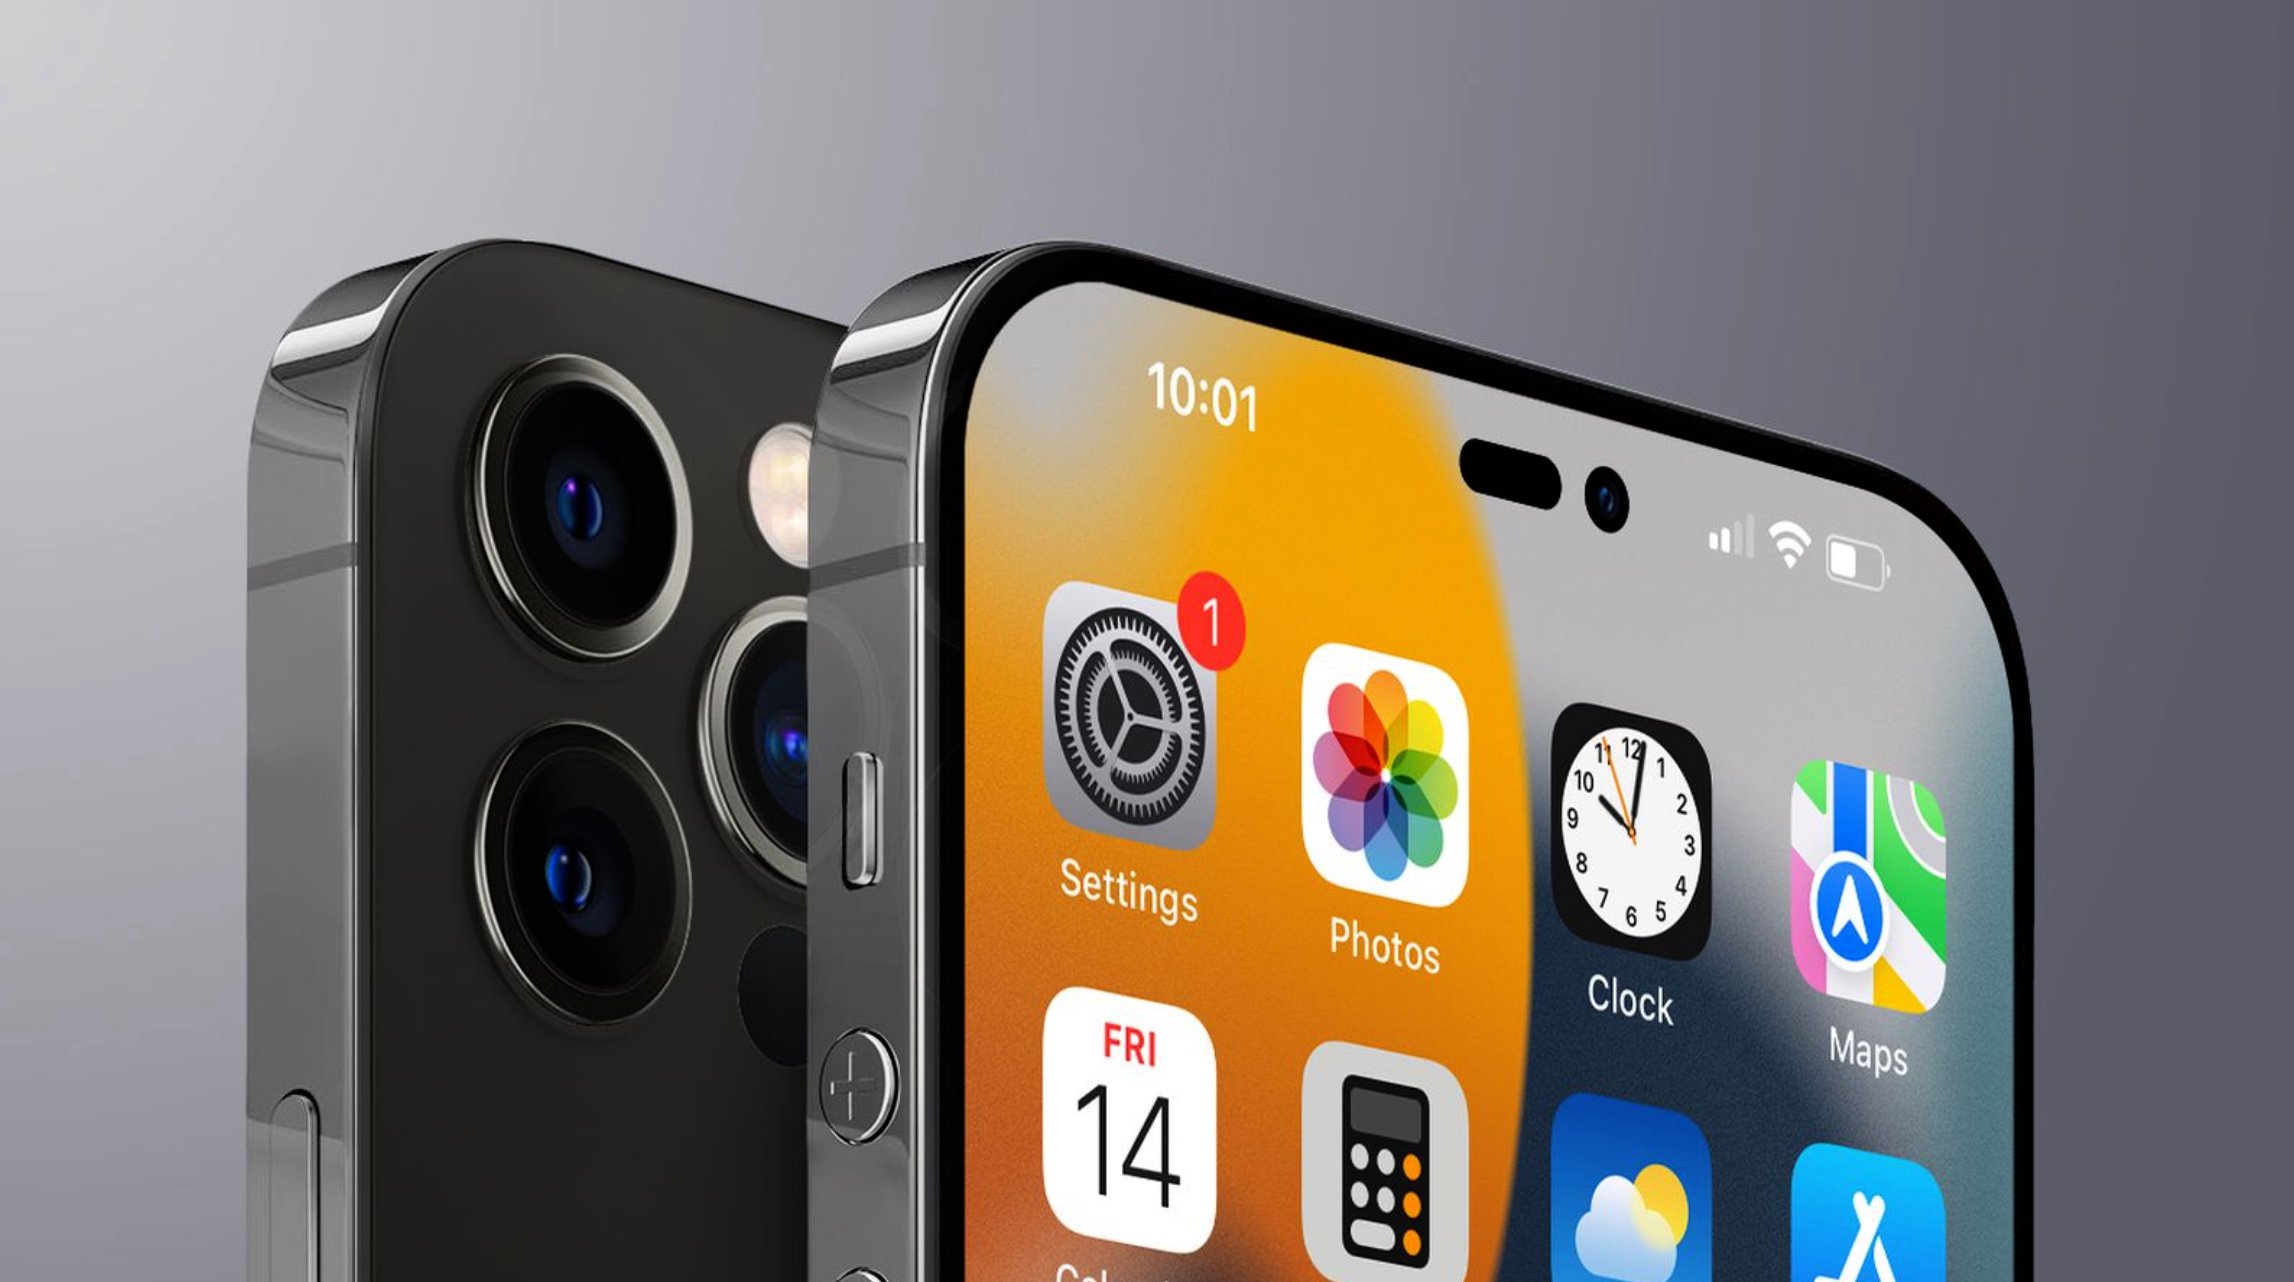 Apple and Samsung side by side again for the futuristic iPhone 14

